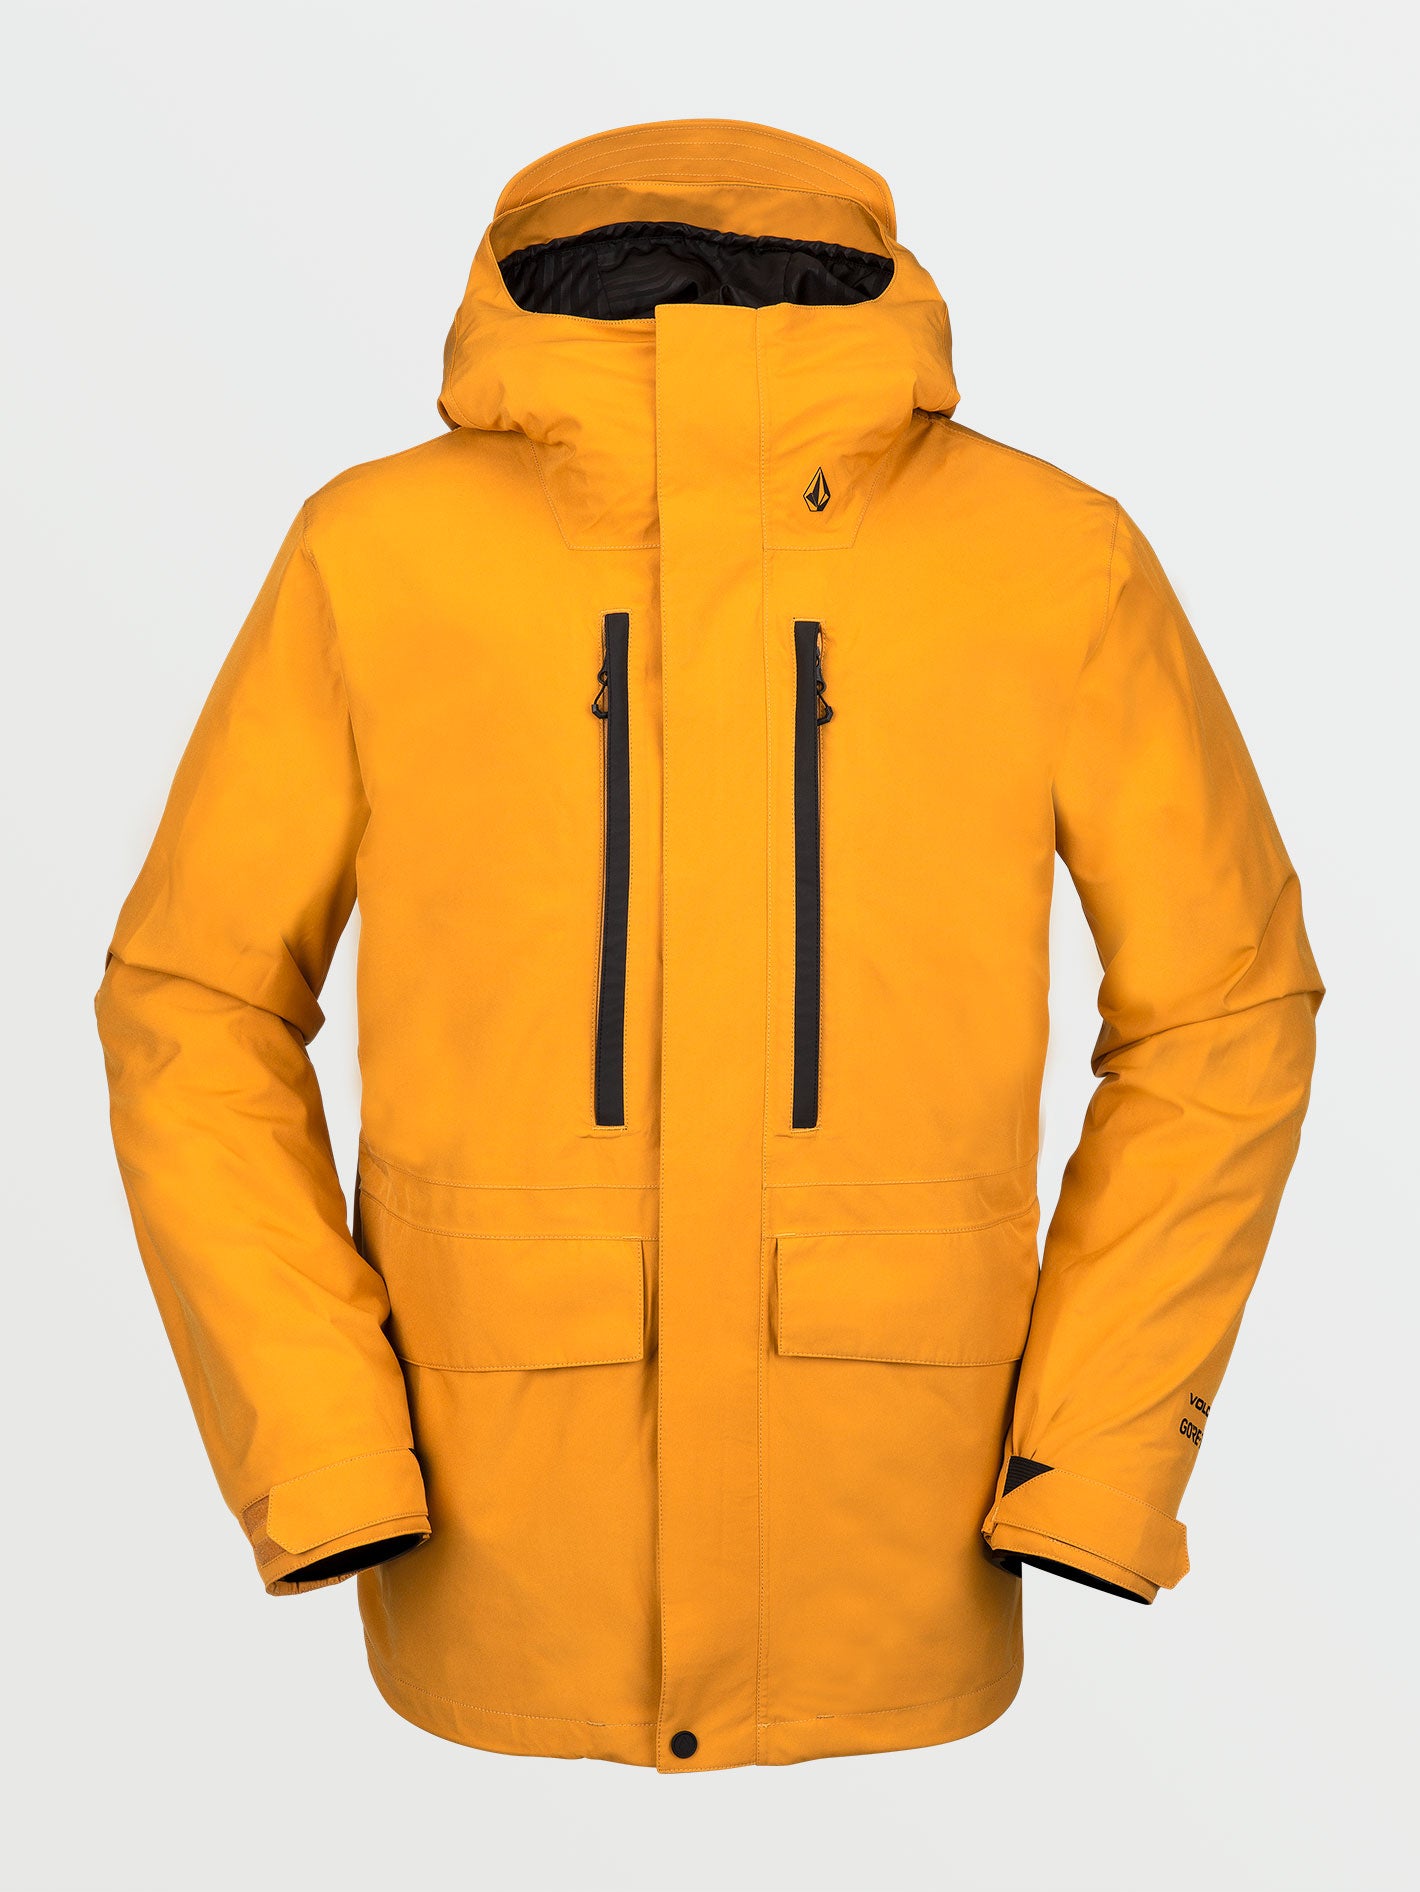 Mens Ten Insulated GORE-TEX Jacket - Resin Gold – Volcom US